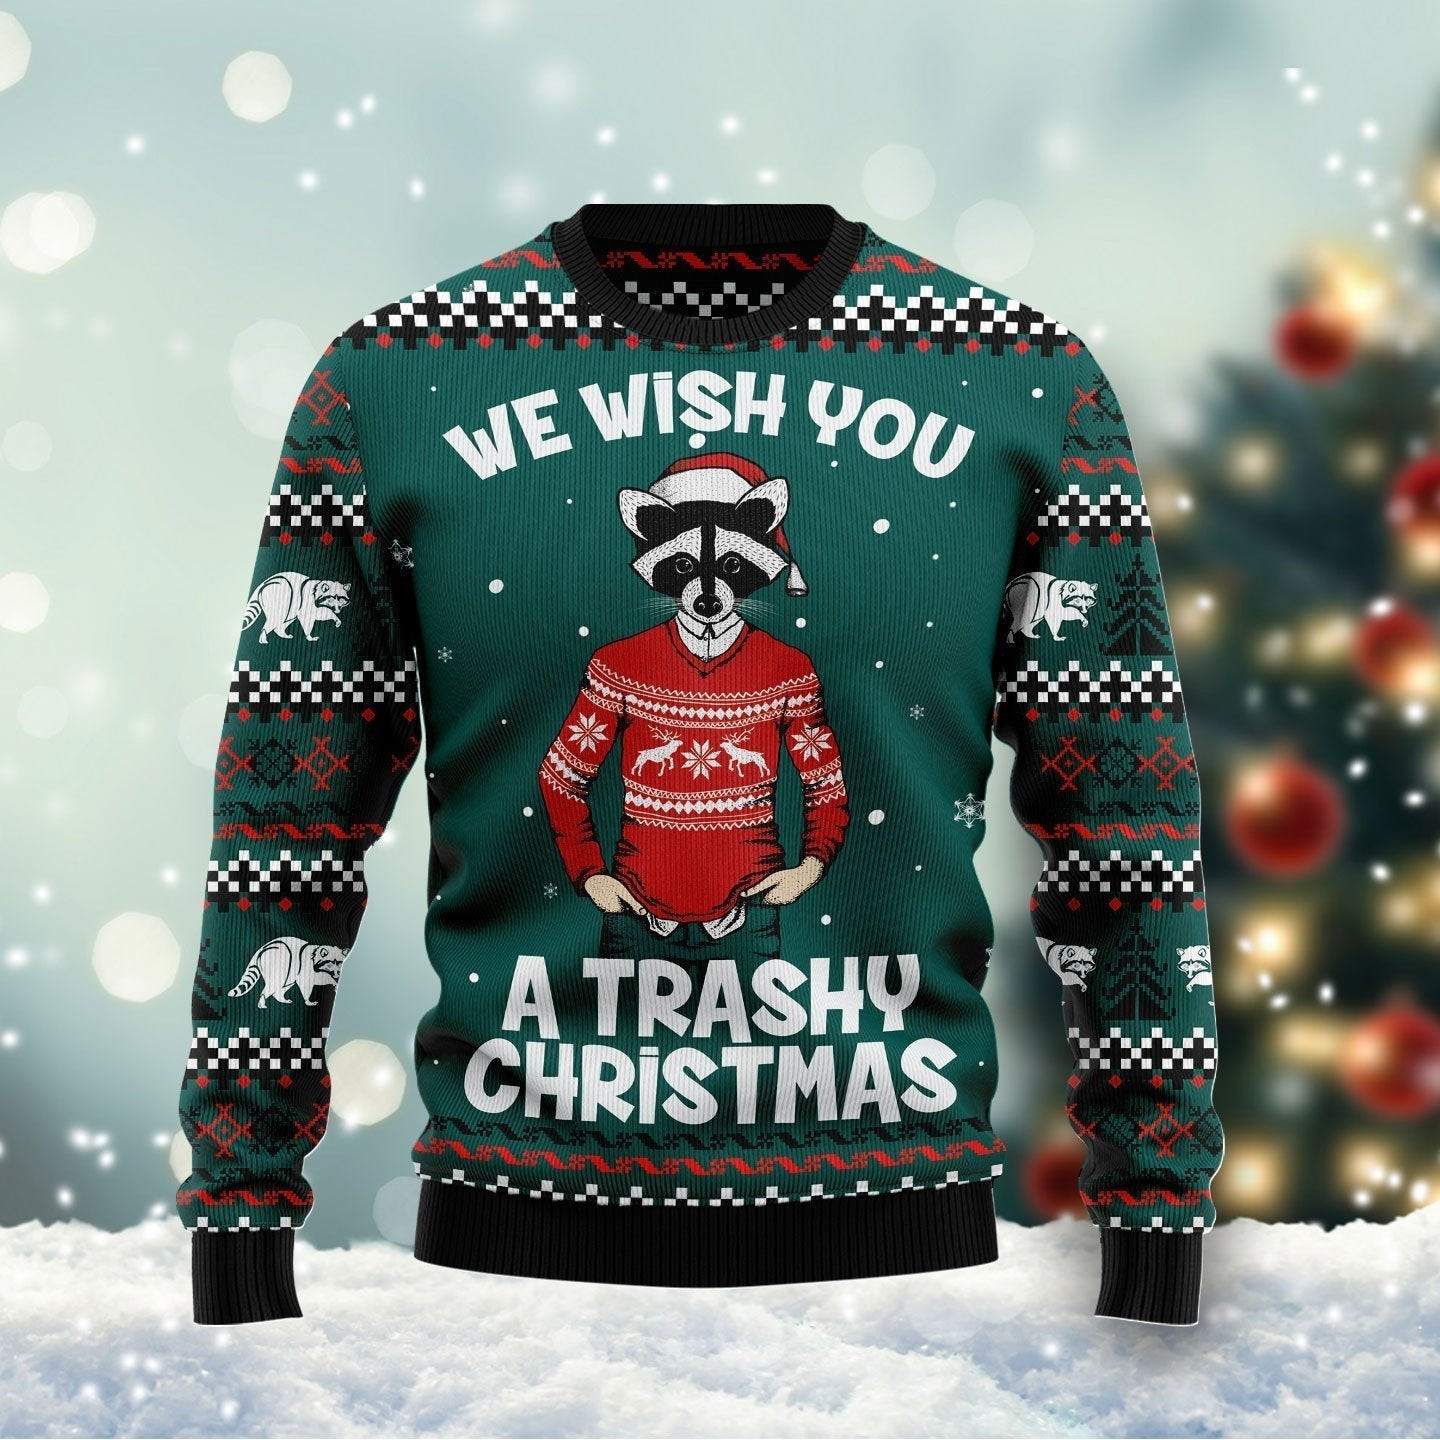 A Trashy Christmas Ugly Christmas Sweater Ugly Sweater For Men Women